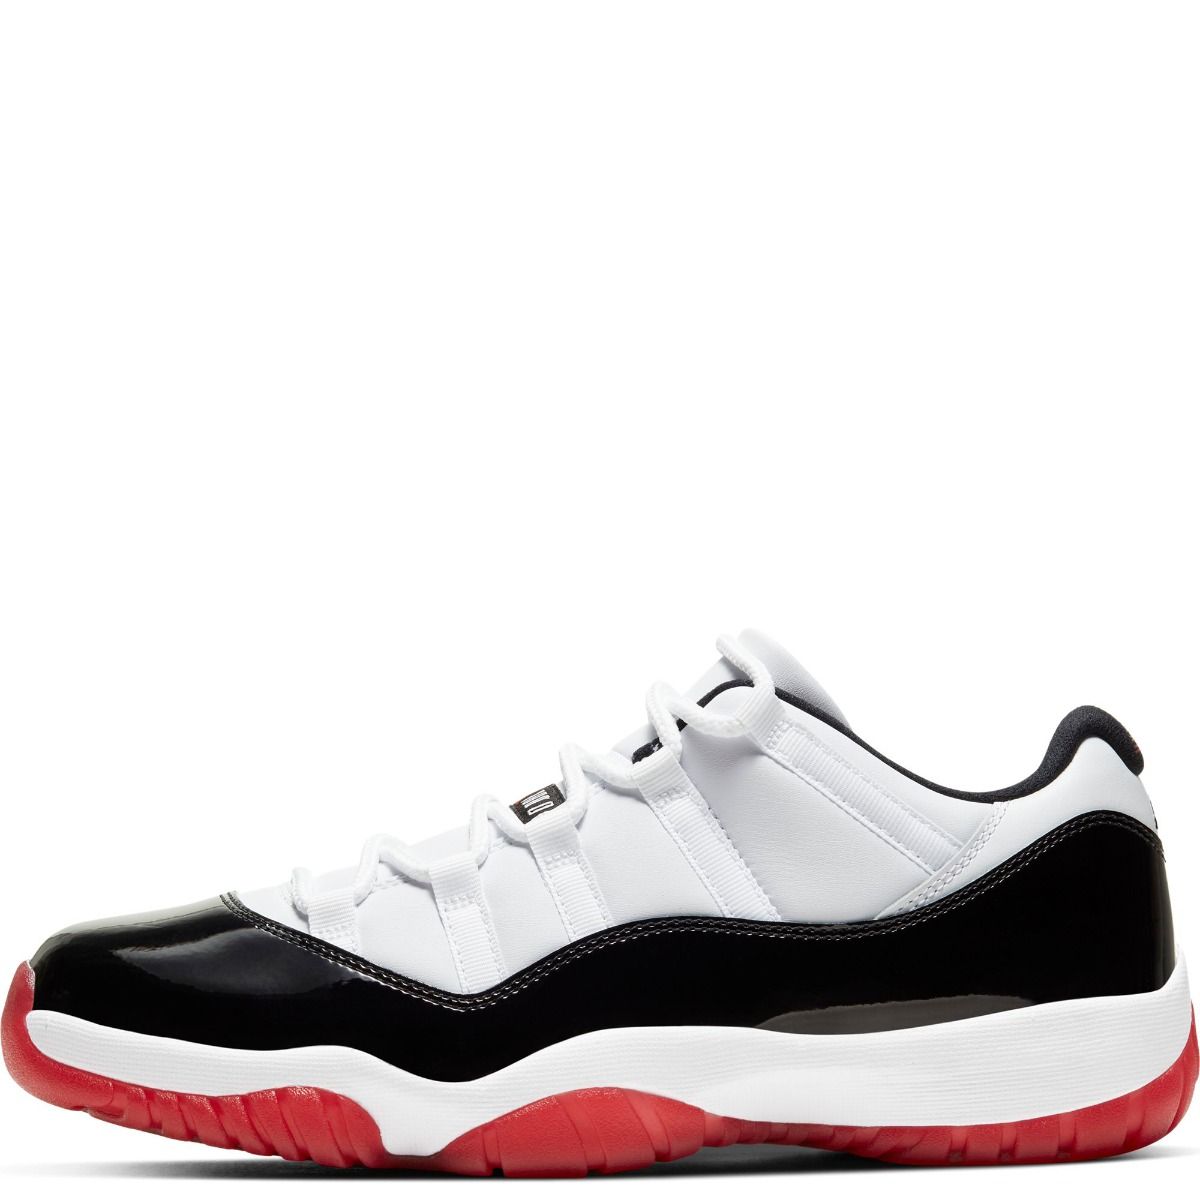 raffle for concord 11